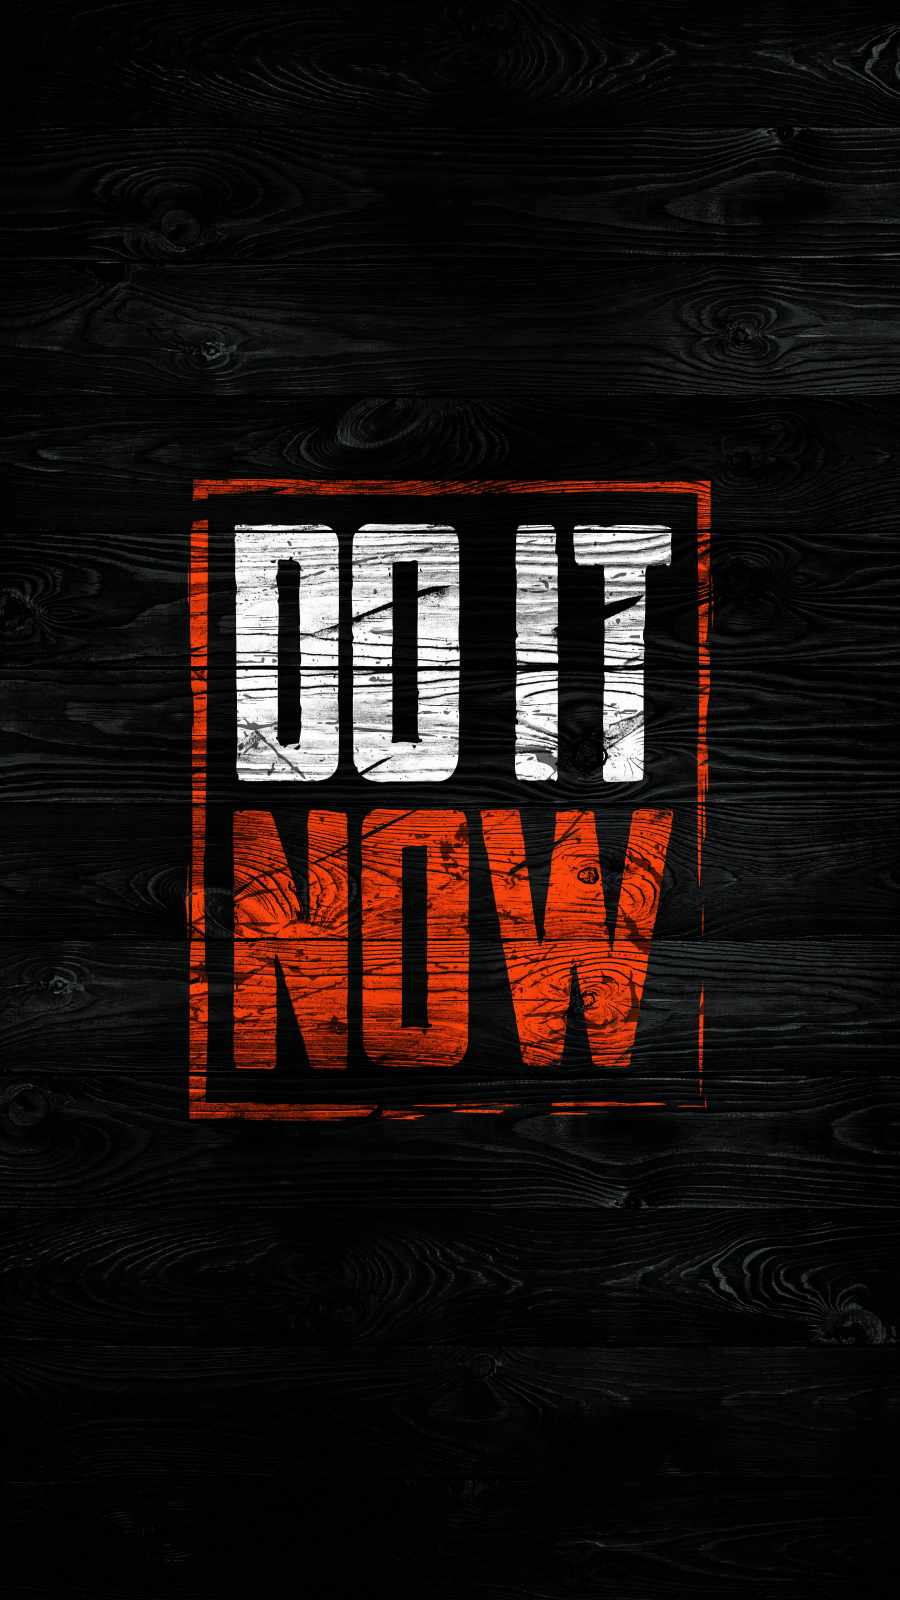 Do It Wallpapers